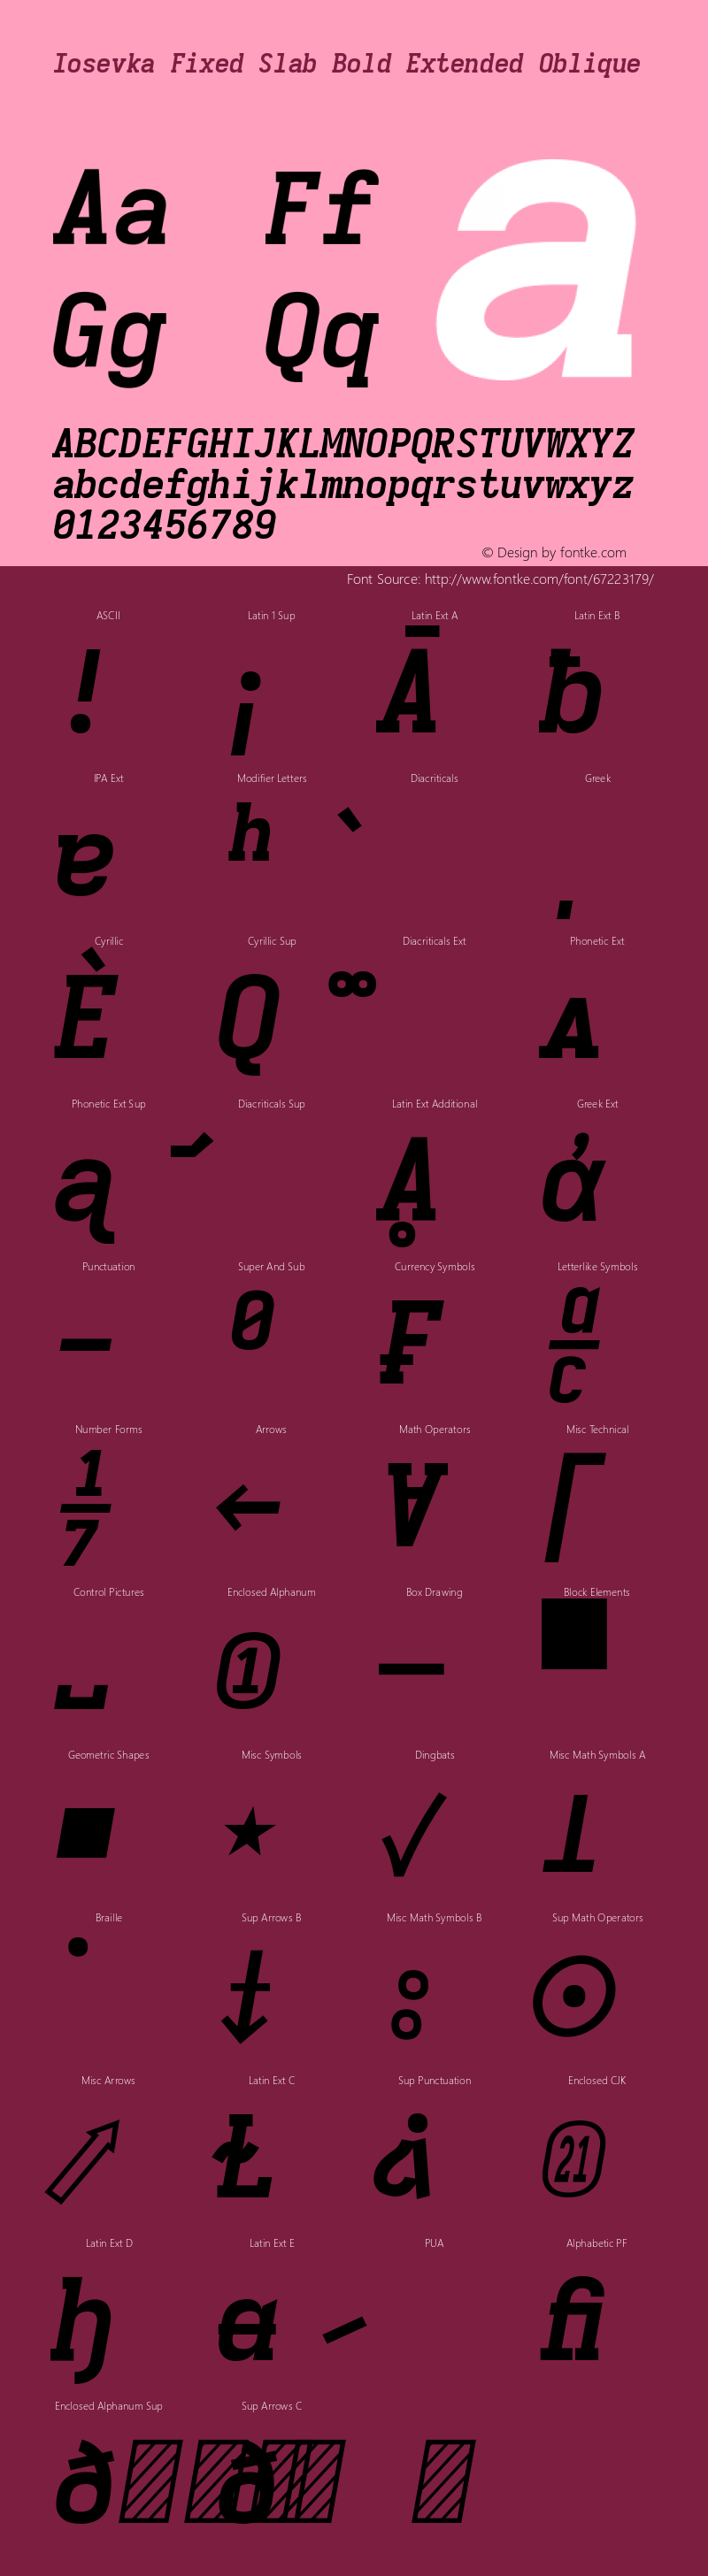 Iosevka Fixed Slab Bold Extended Oblique 3.0.0-rc.7 Font Sample